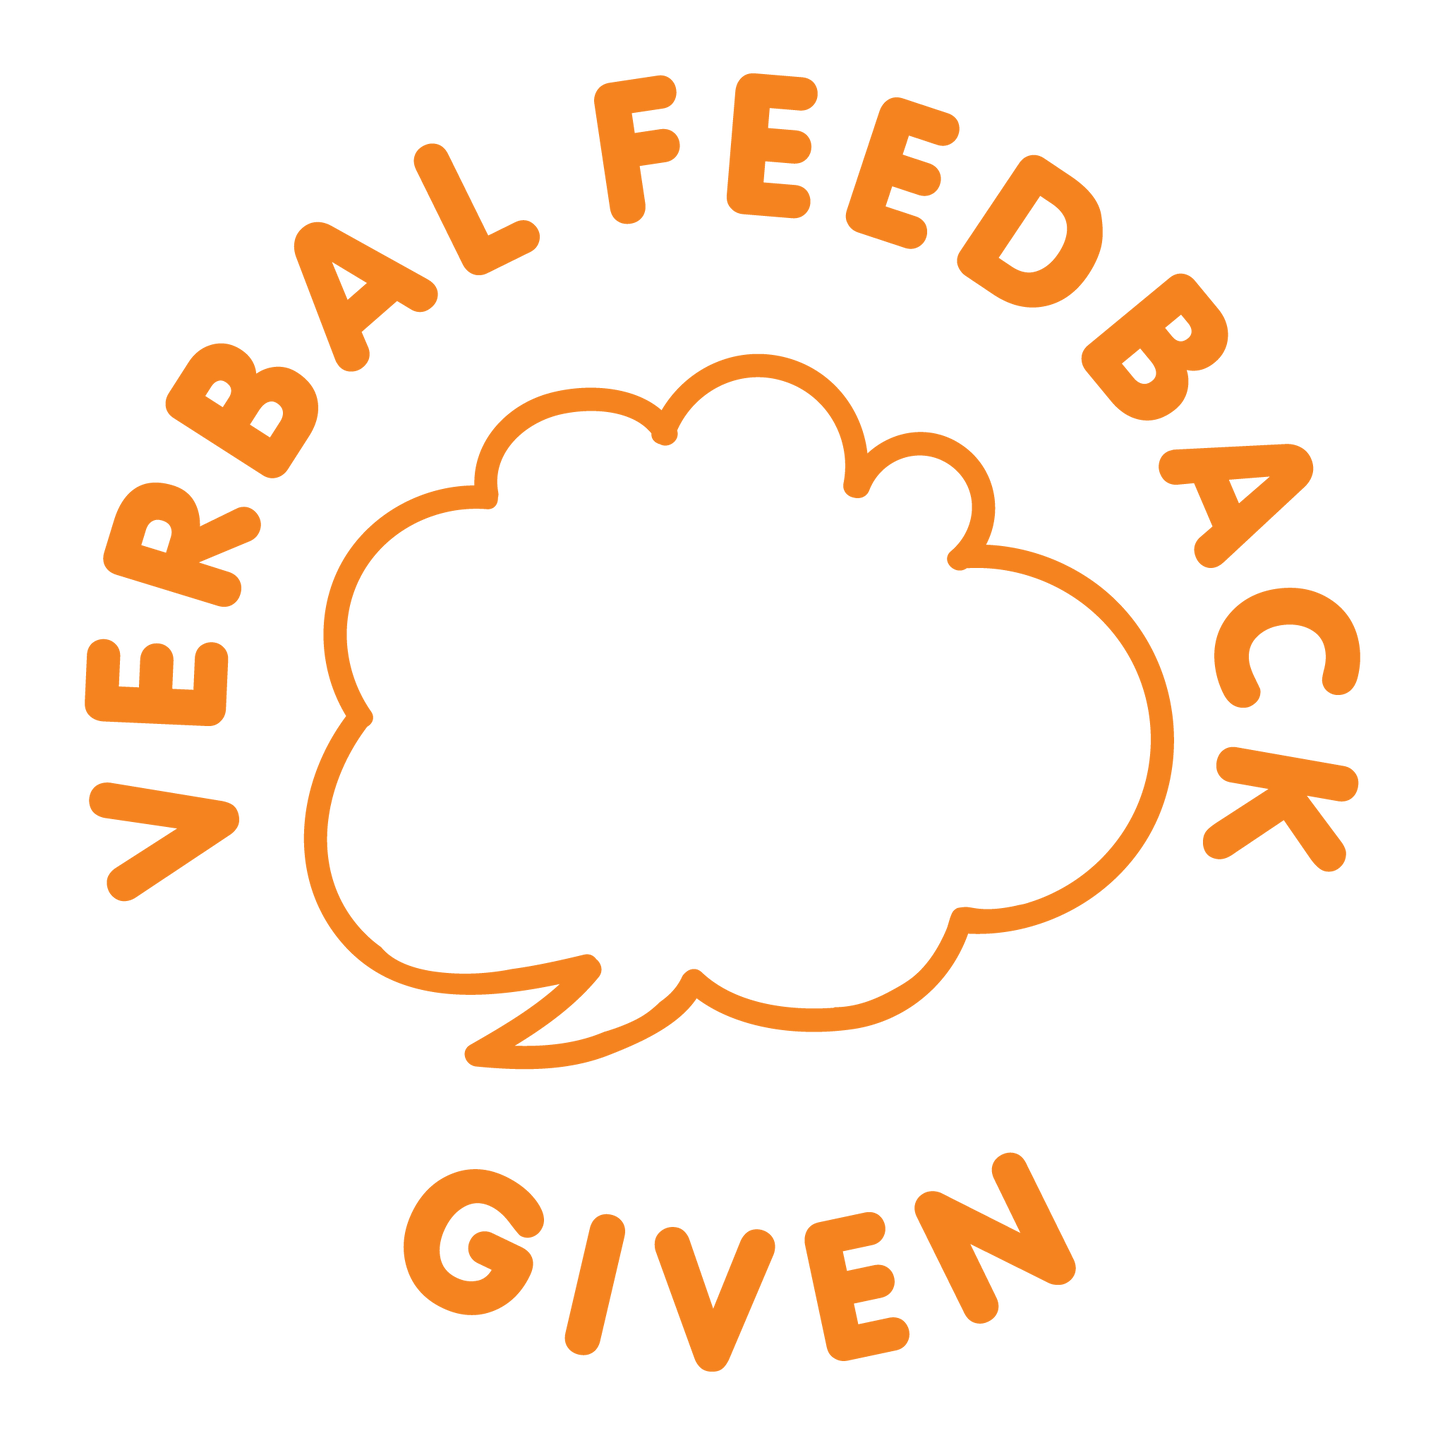 VERBAL FEEDBACK GIVEN STAMP